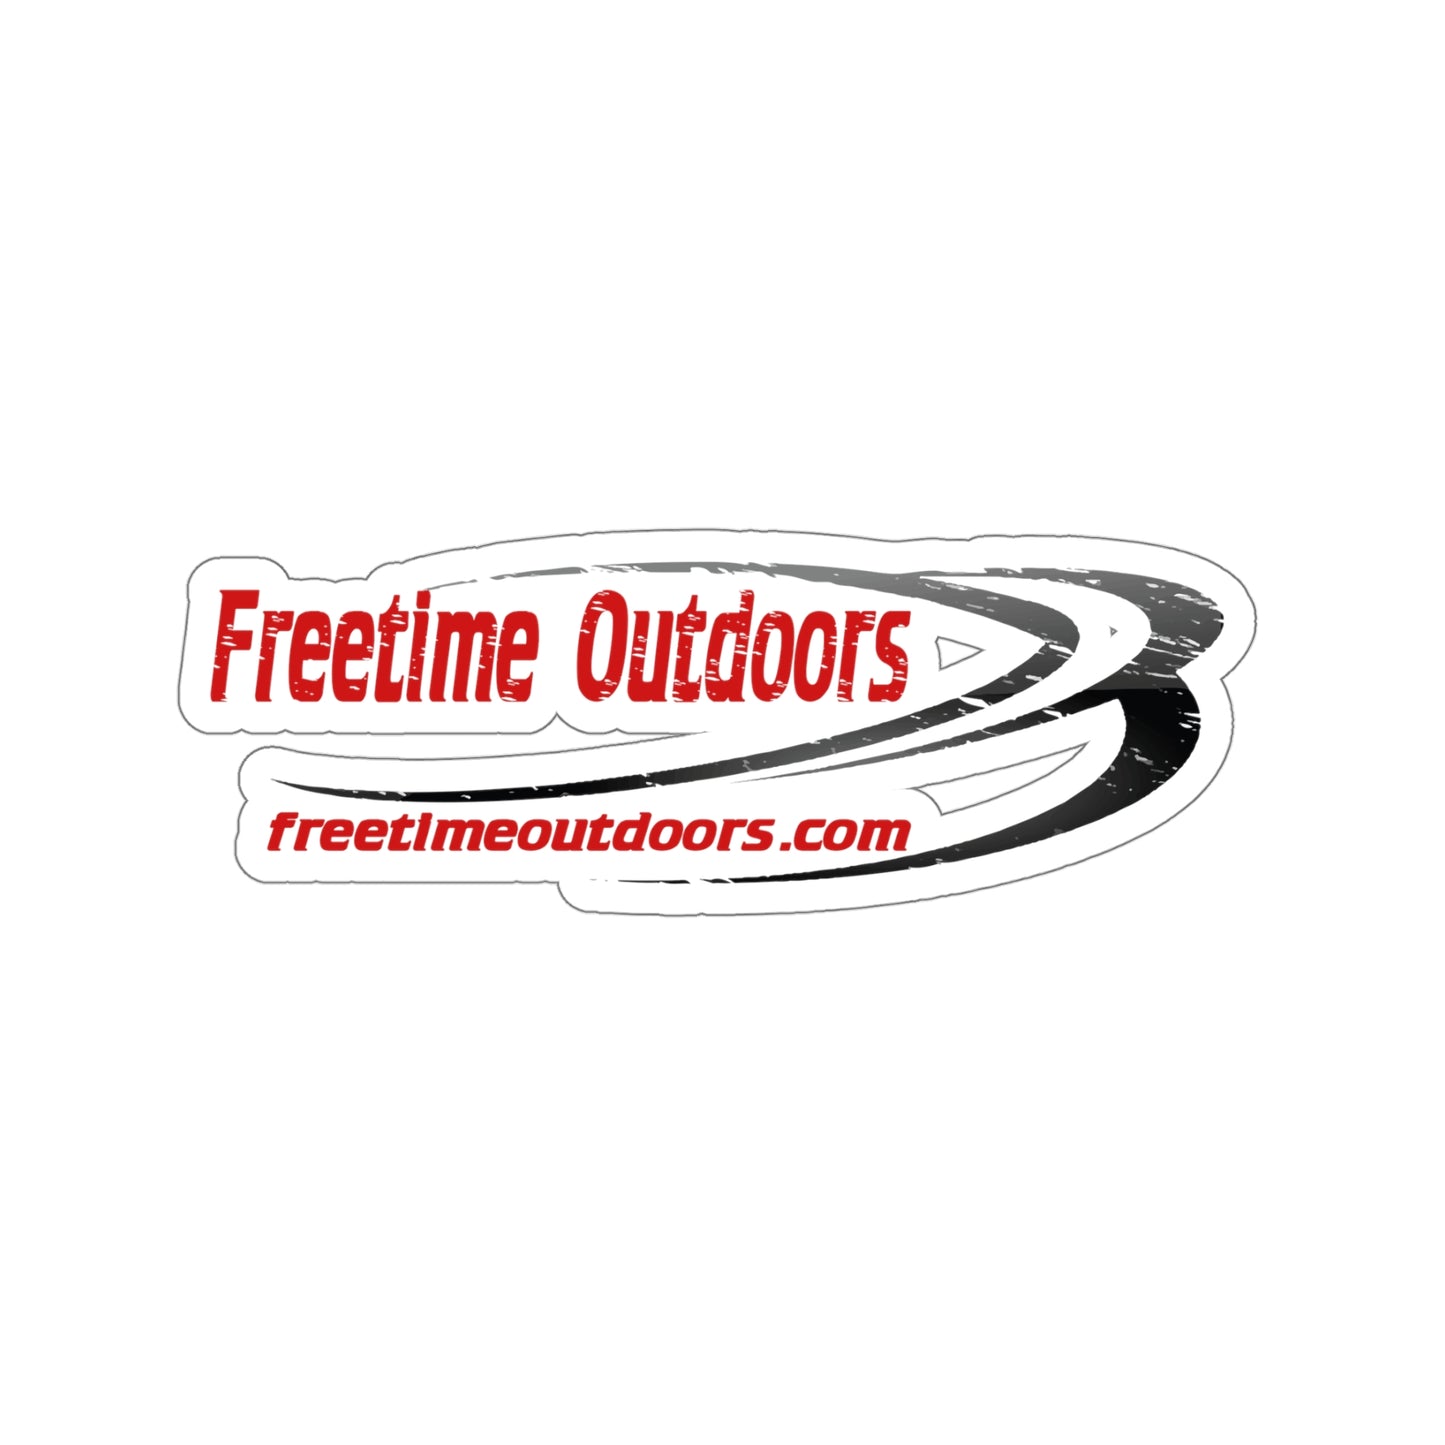 Freetime Outdoors Stickers With Website